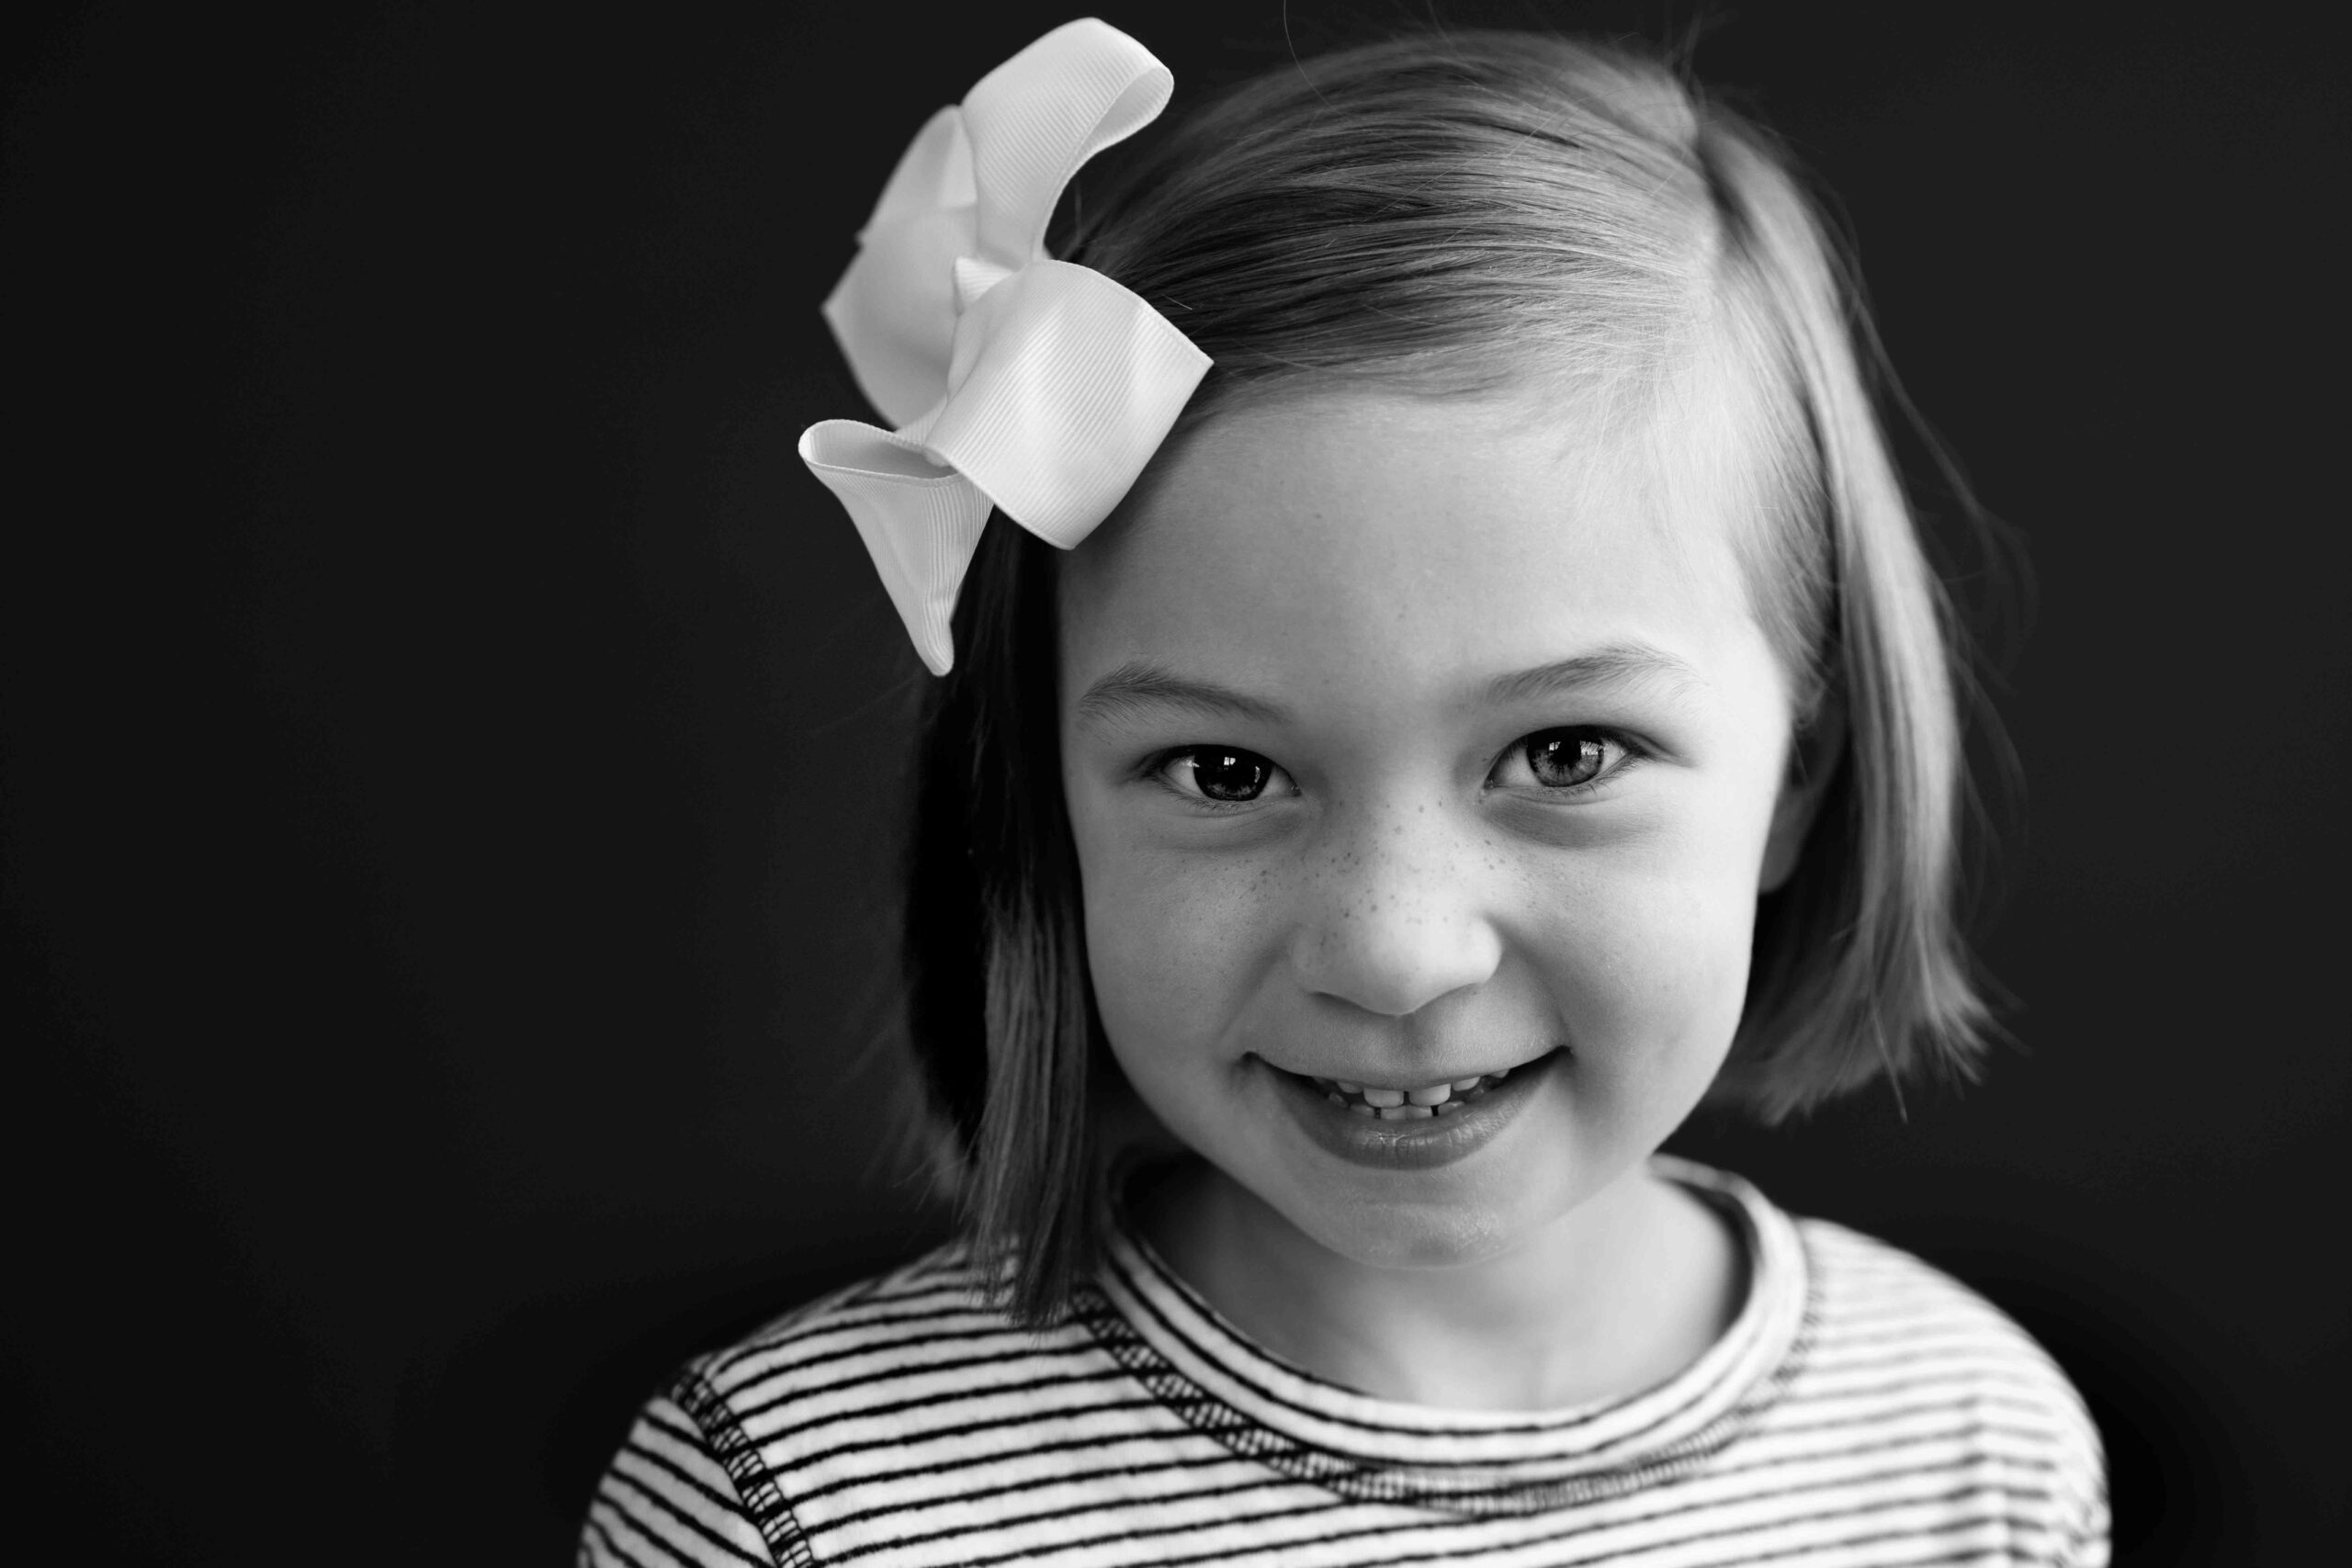 black and white portrait of little girl with white bow in her hair